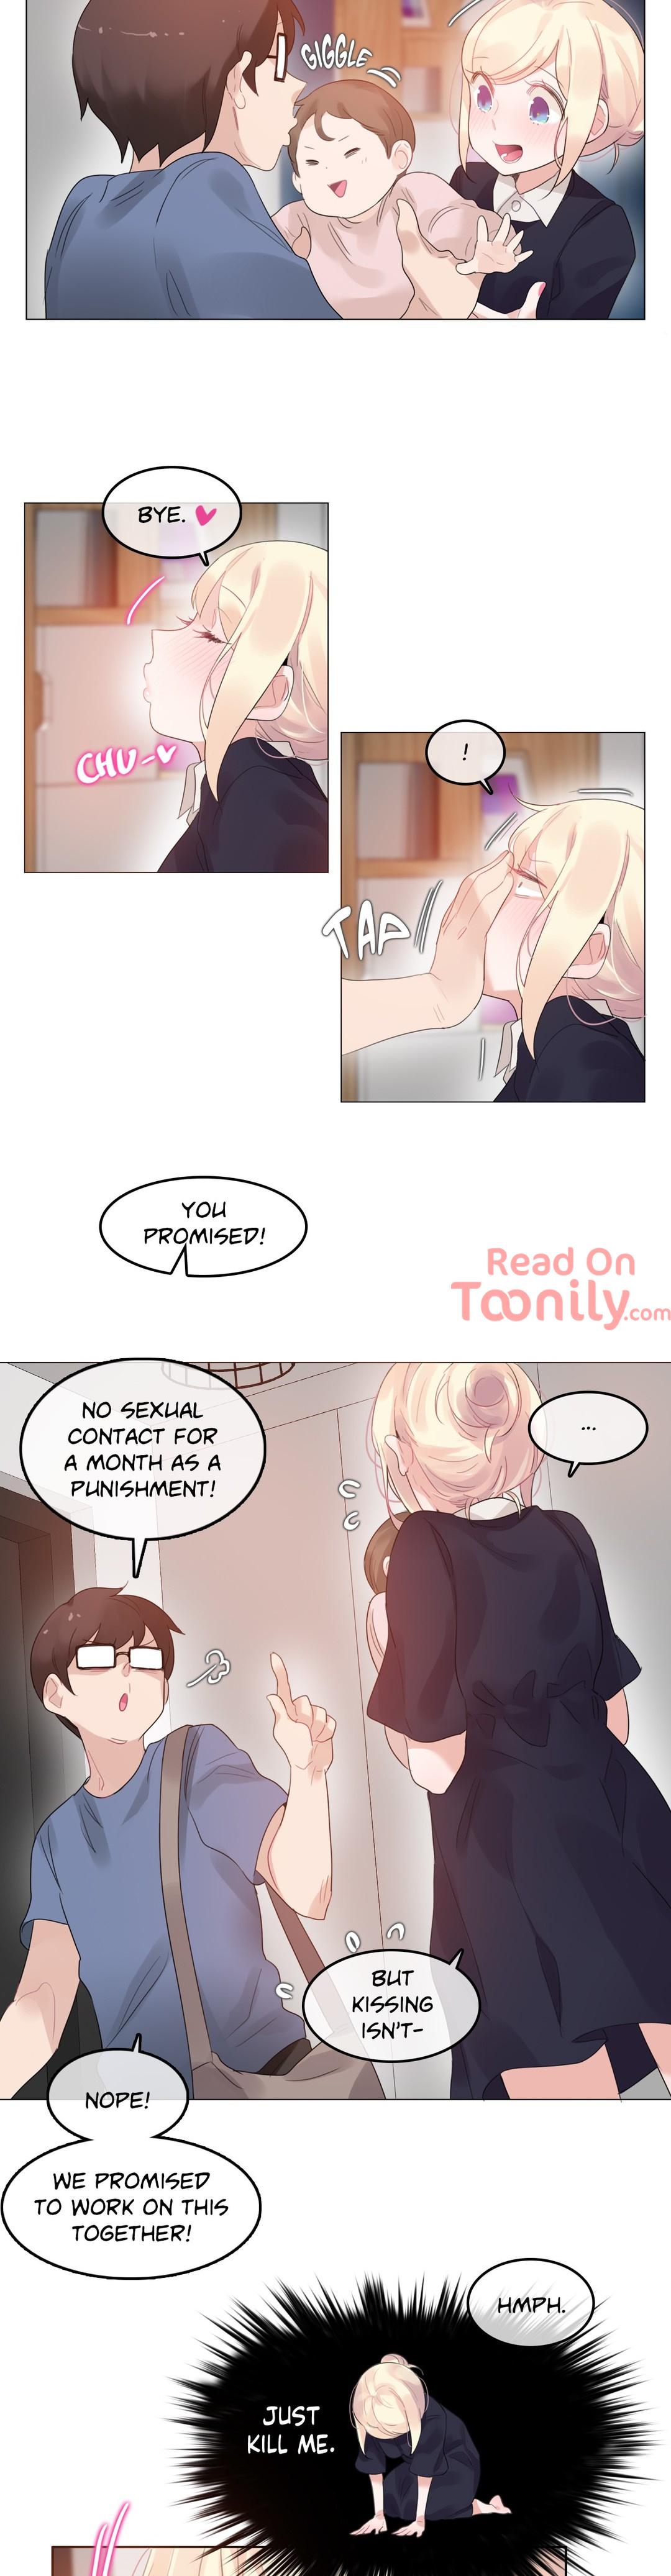 A Pervert's Daily Life • Chapter 66-70 58